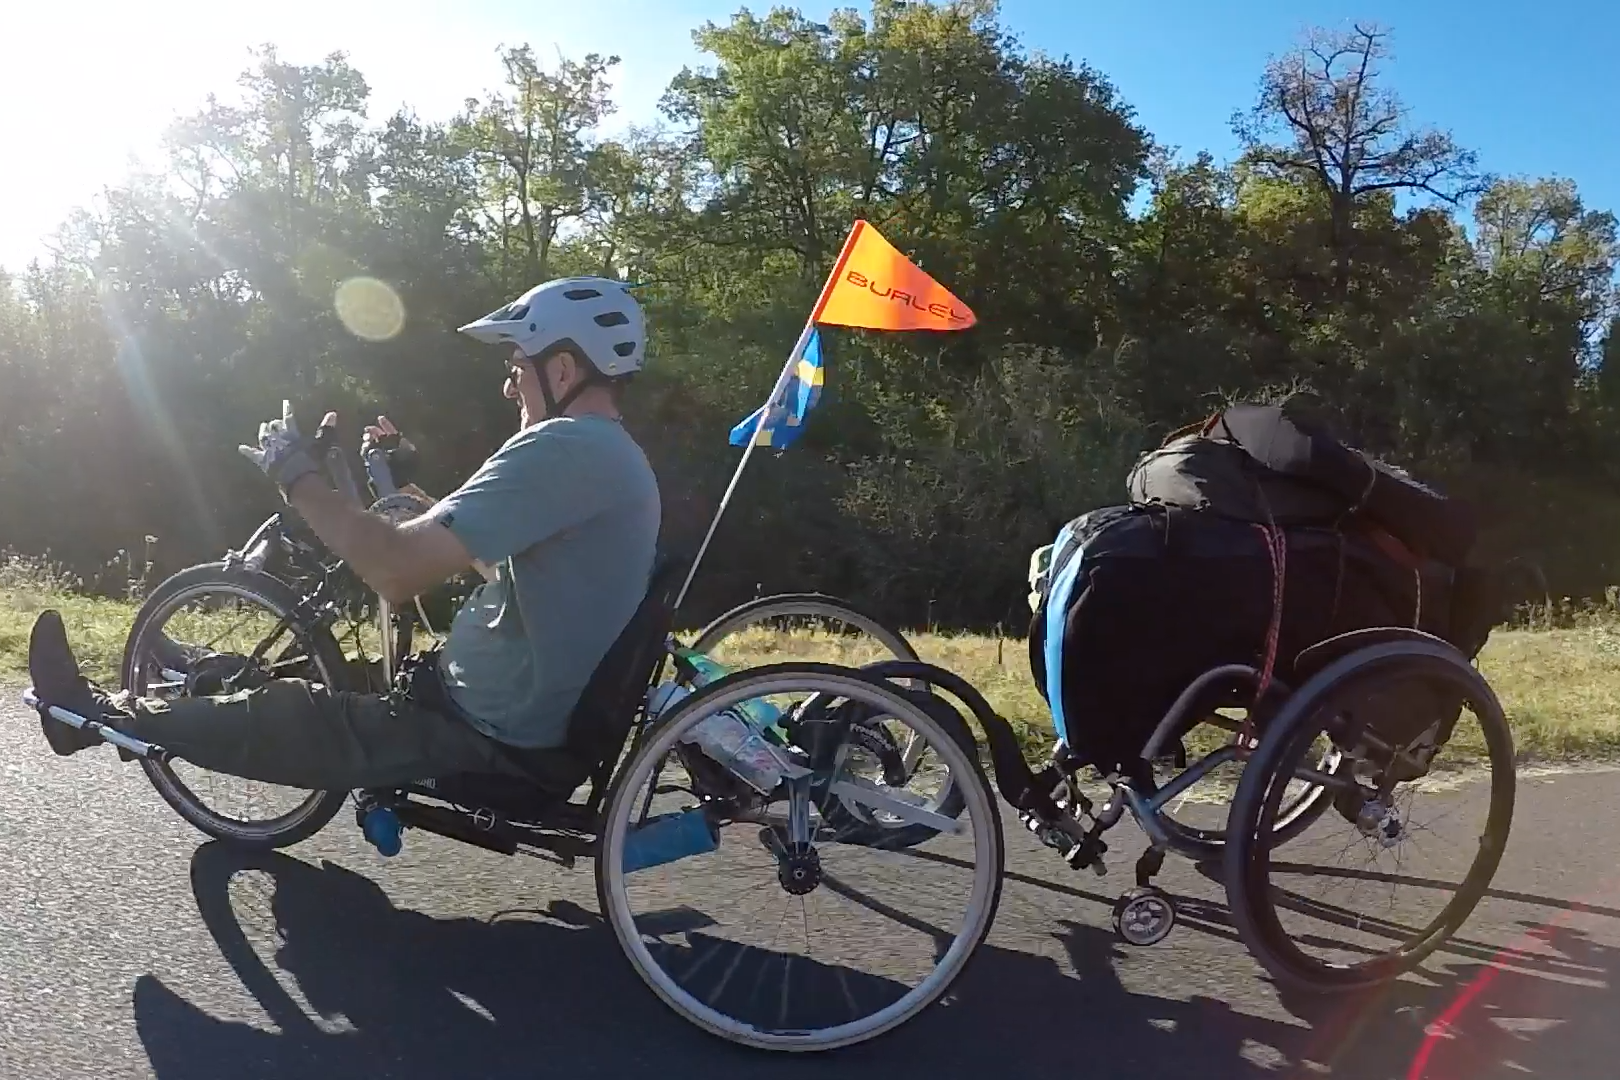 A person riding a handcycle rides toward the left of the frame. They are towing their wheelchair with bags on it behind them.